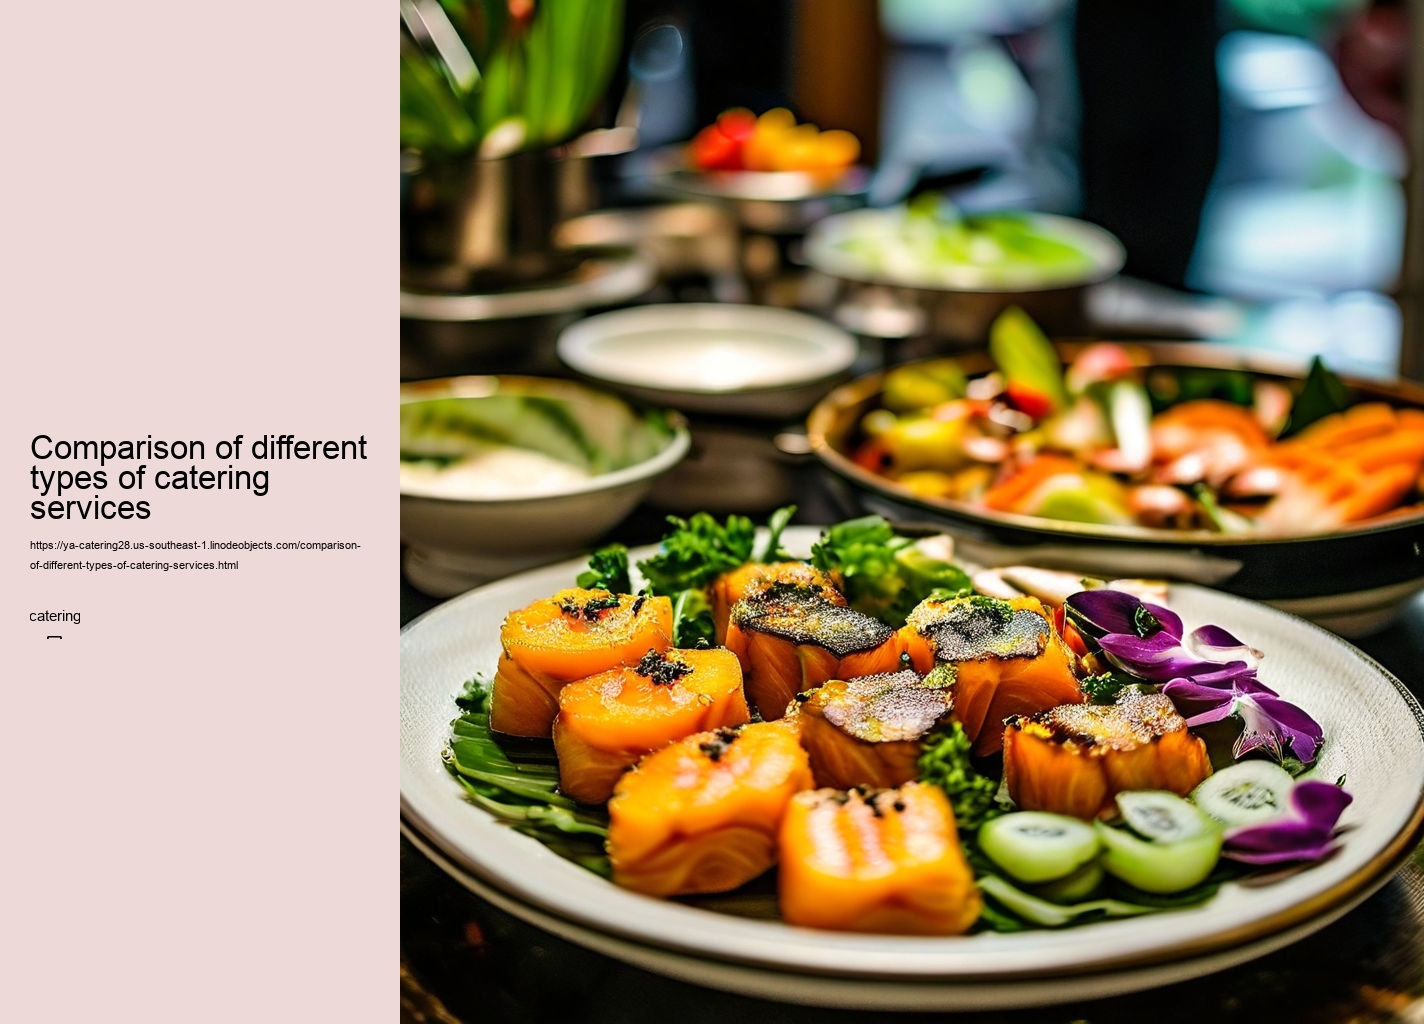 Comparison of different types of catering services